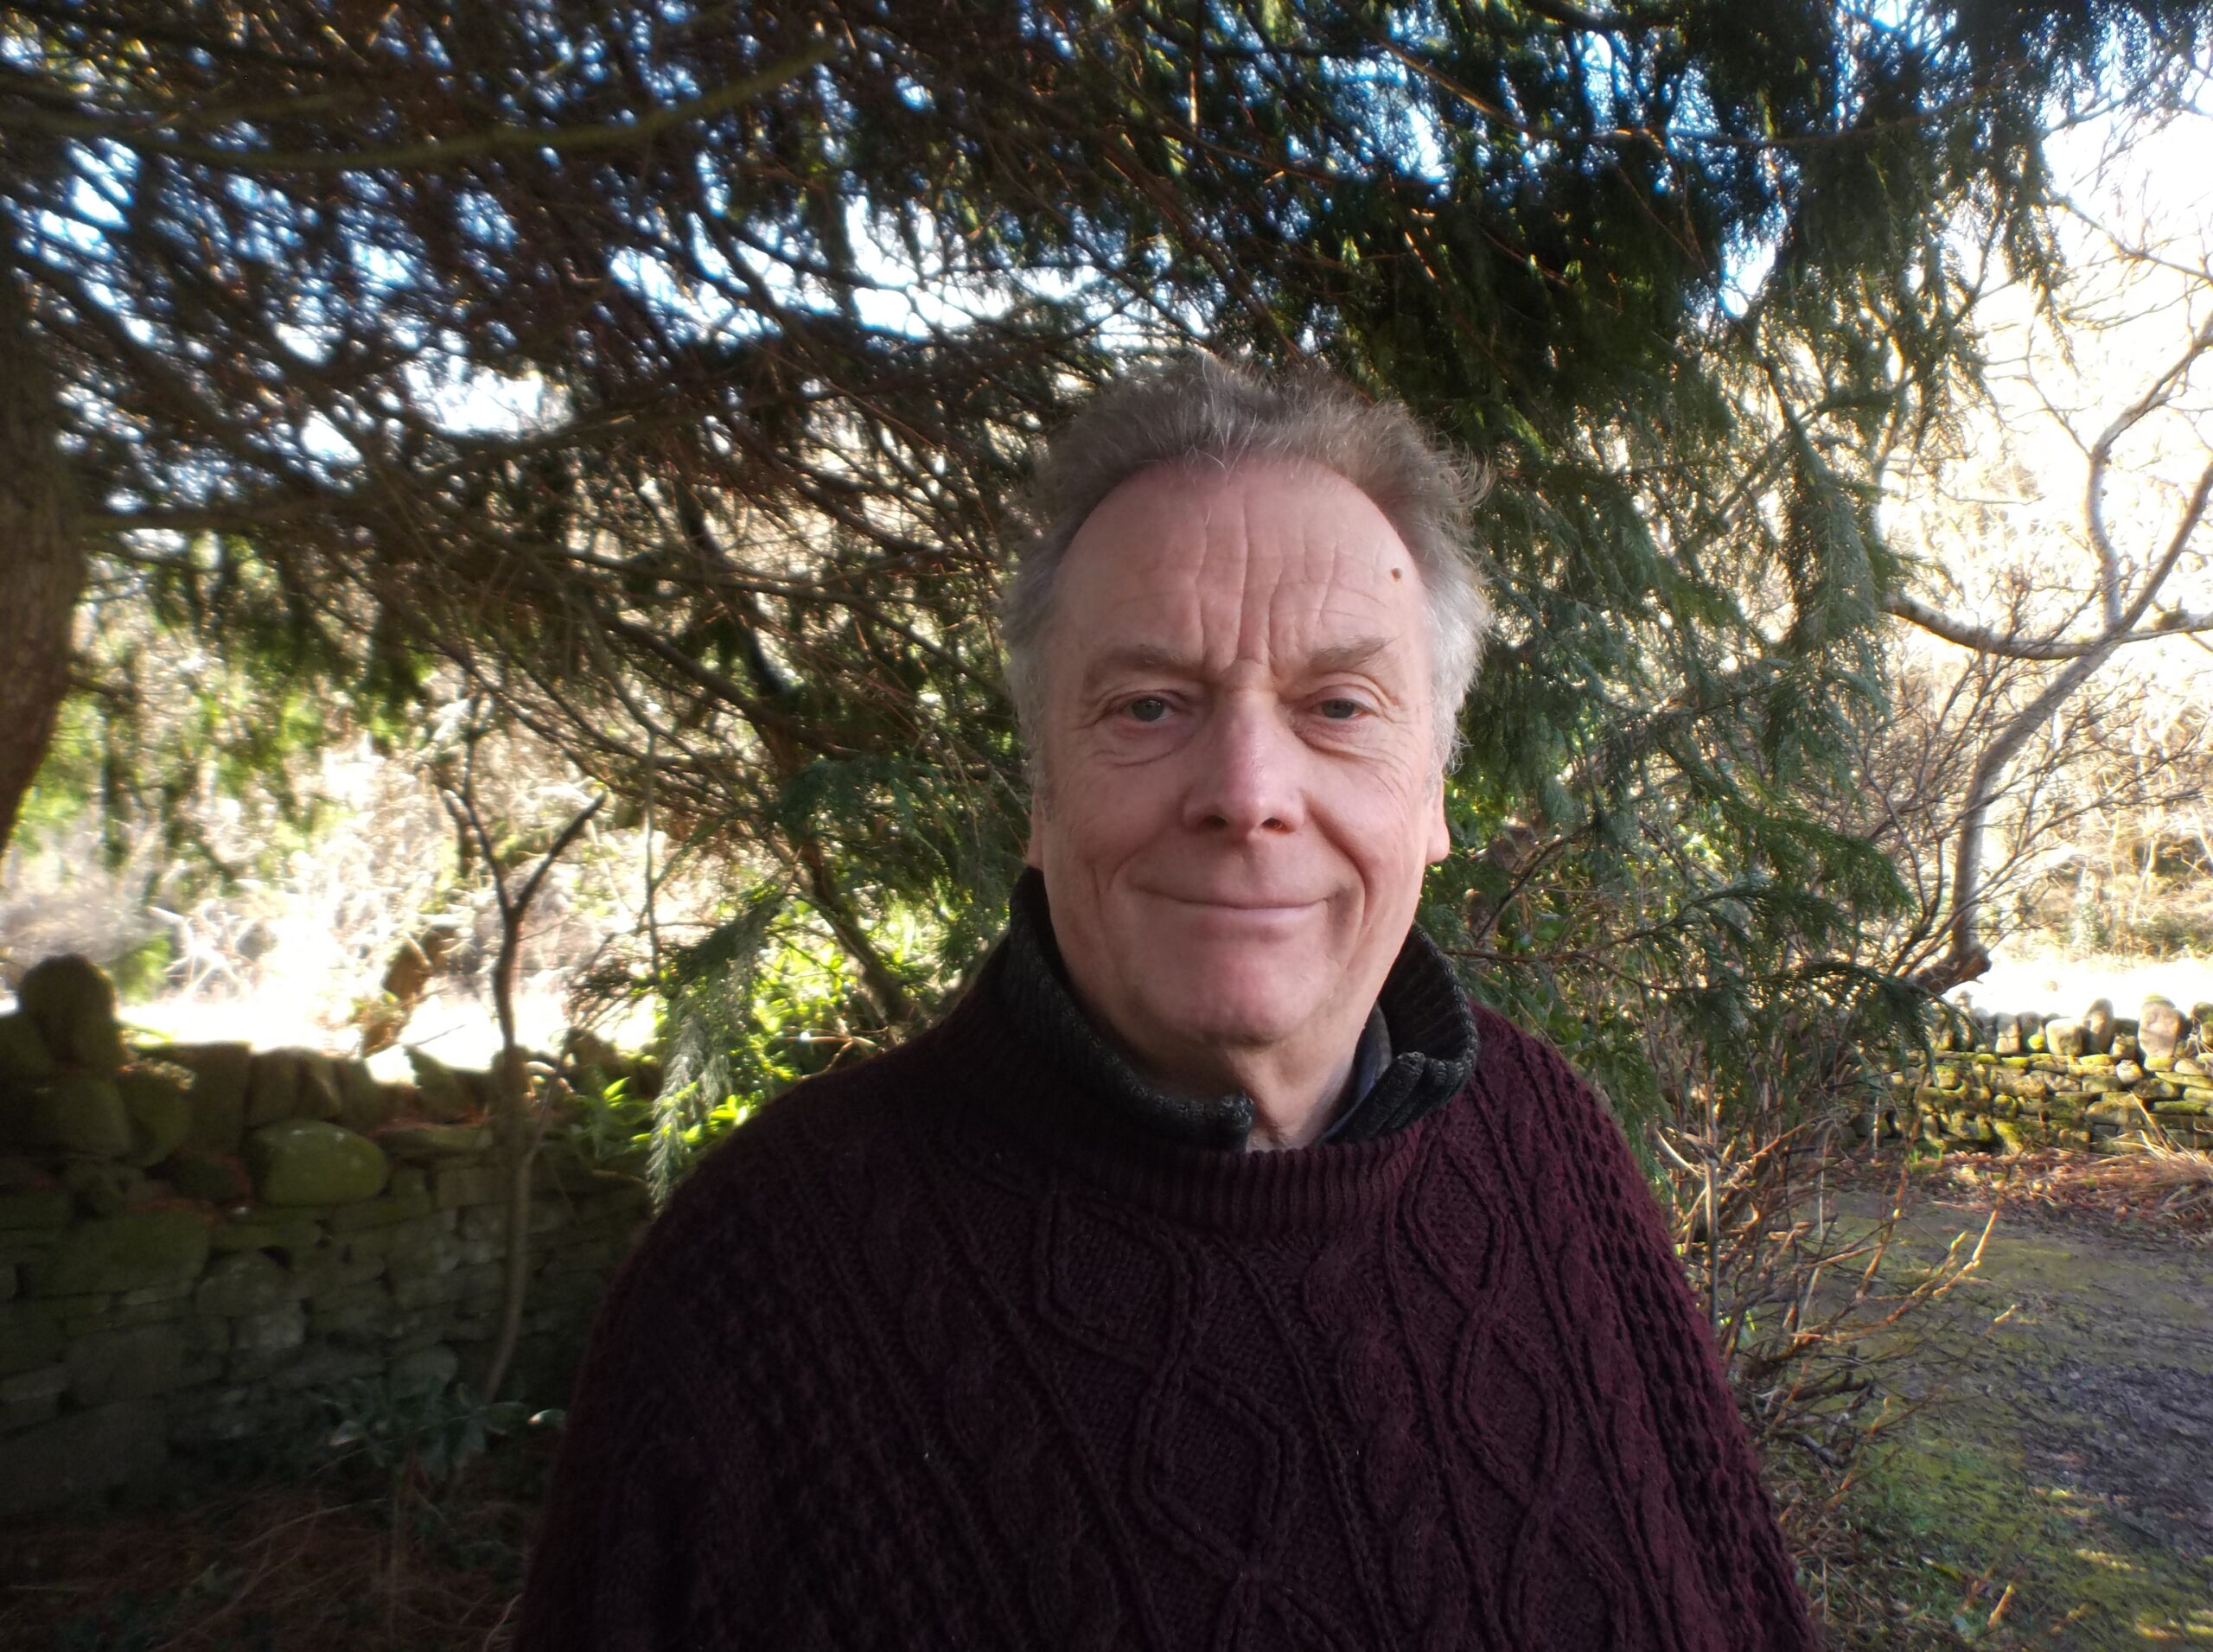 A man with short grey hair, wearing a dark jumper with trees in the background